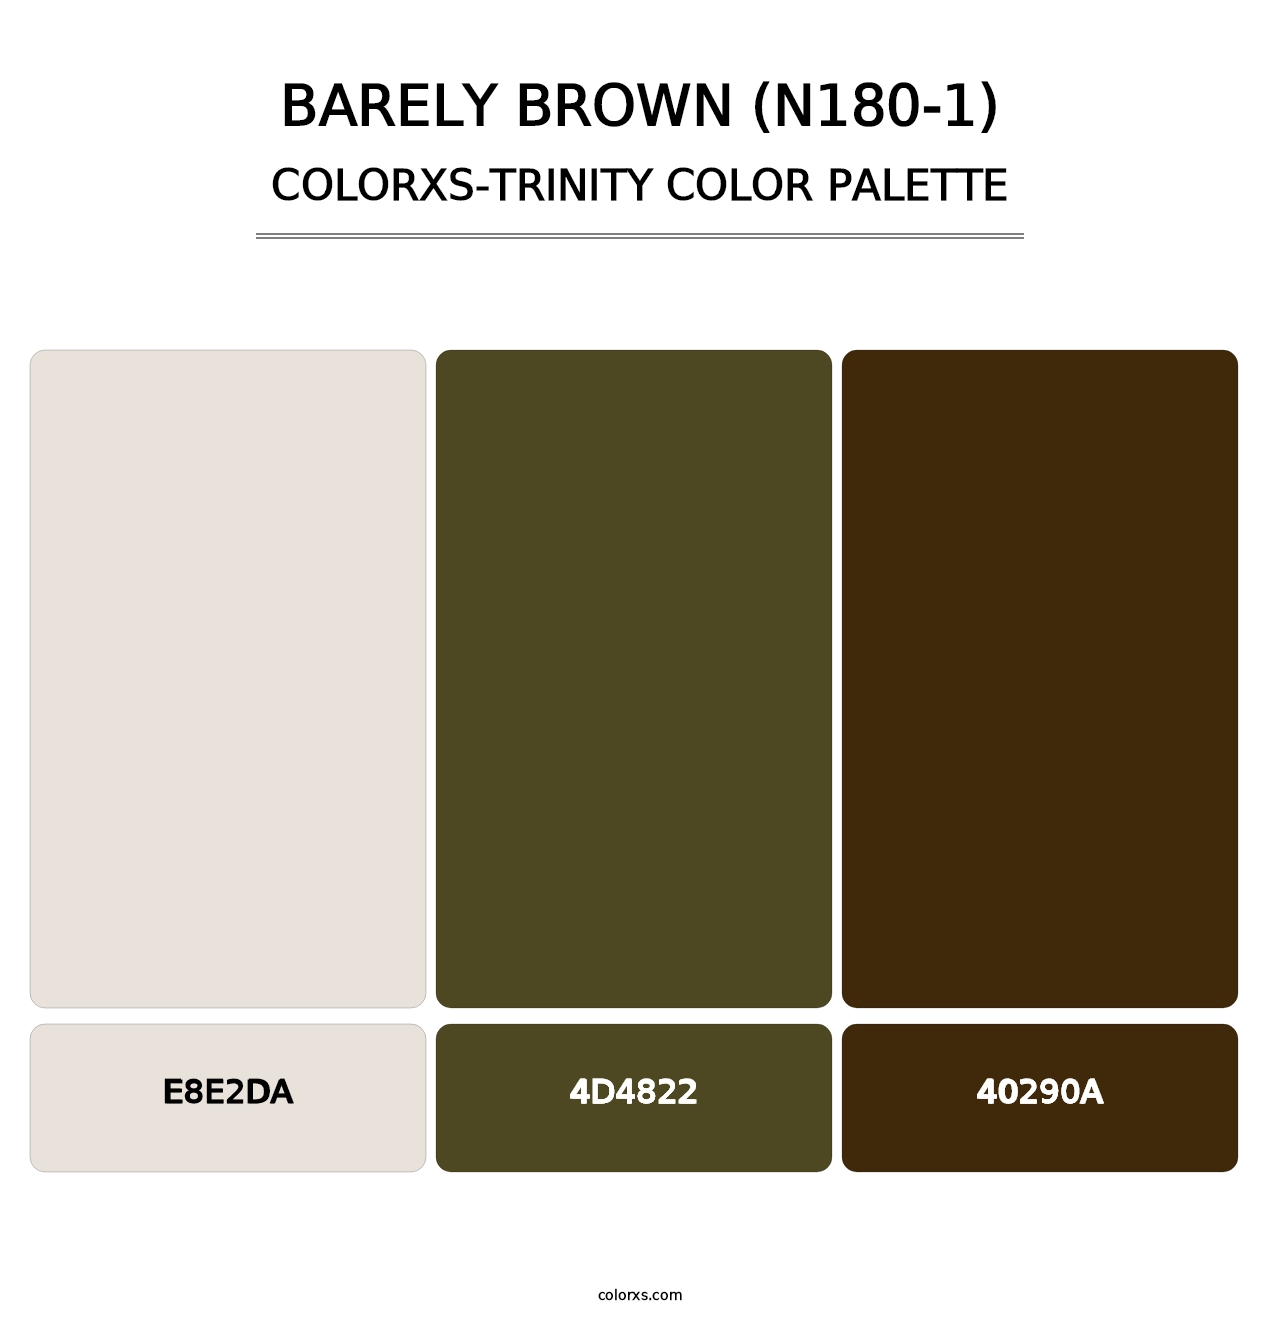 Barely Brown (N180-1) - Colorxs Trinity Palette